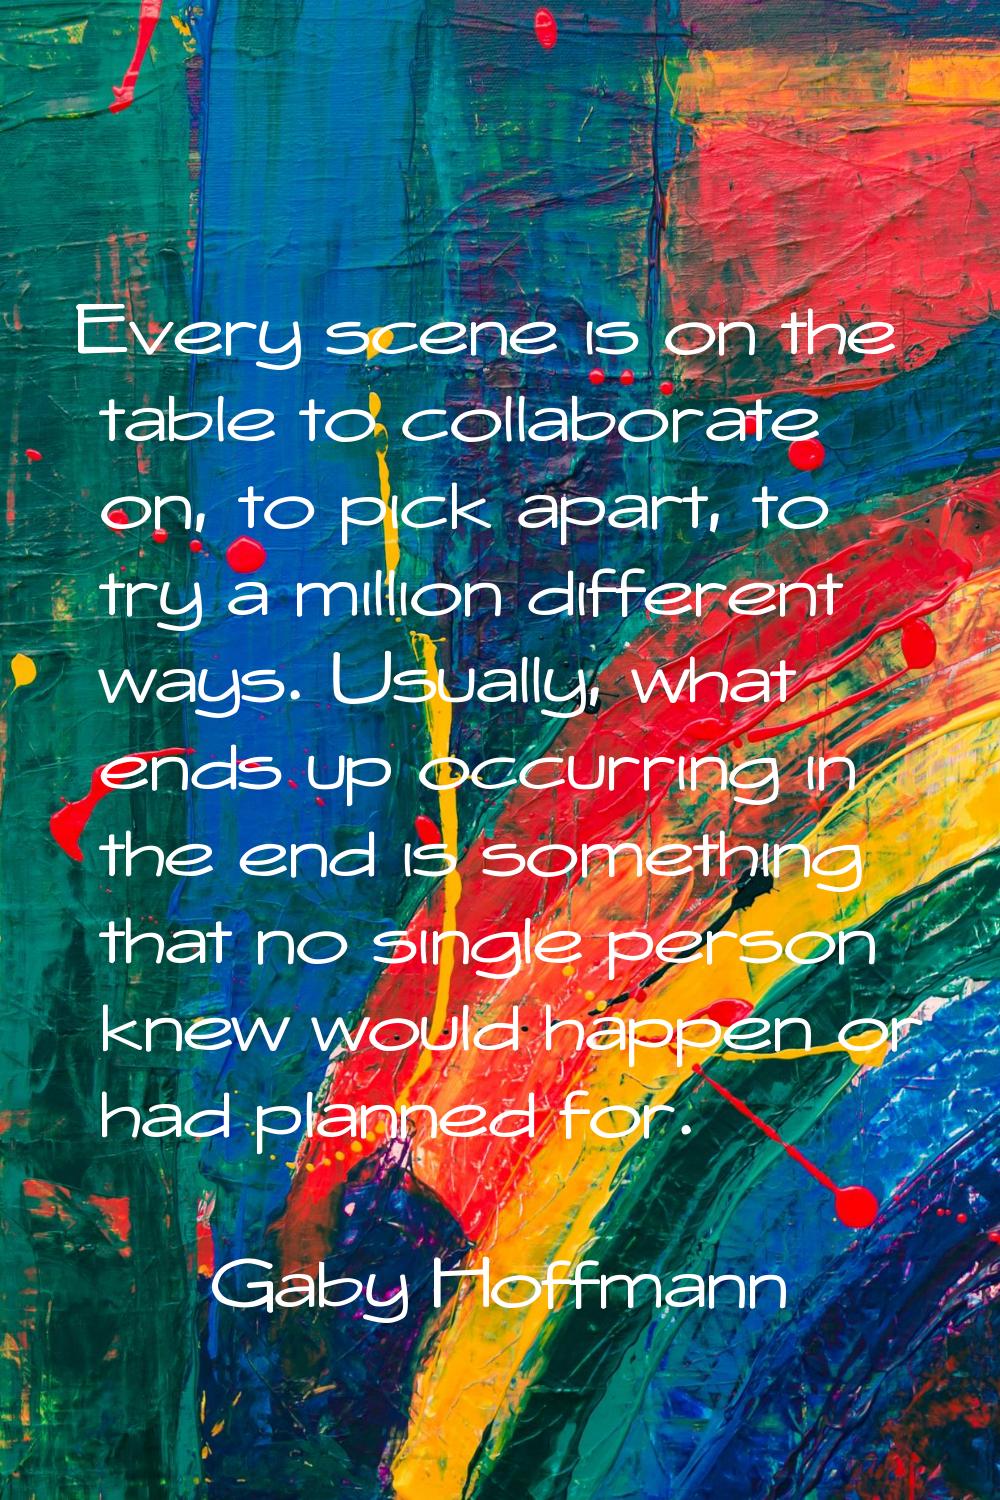 Every scene is on the table to collaborate on, to pick apart, to try a million different ways. Usua